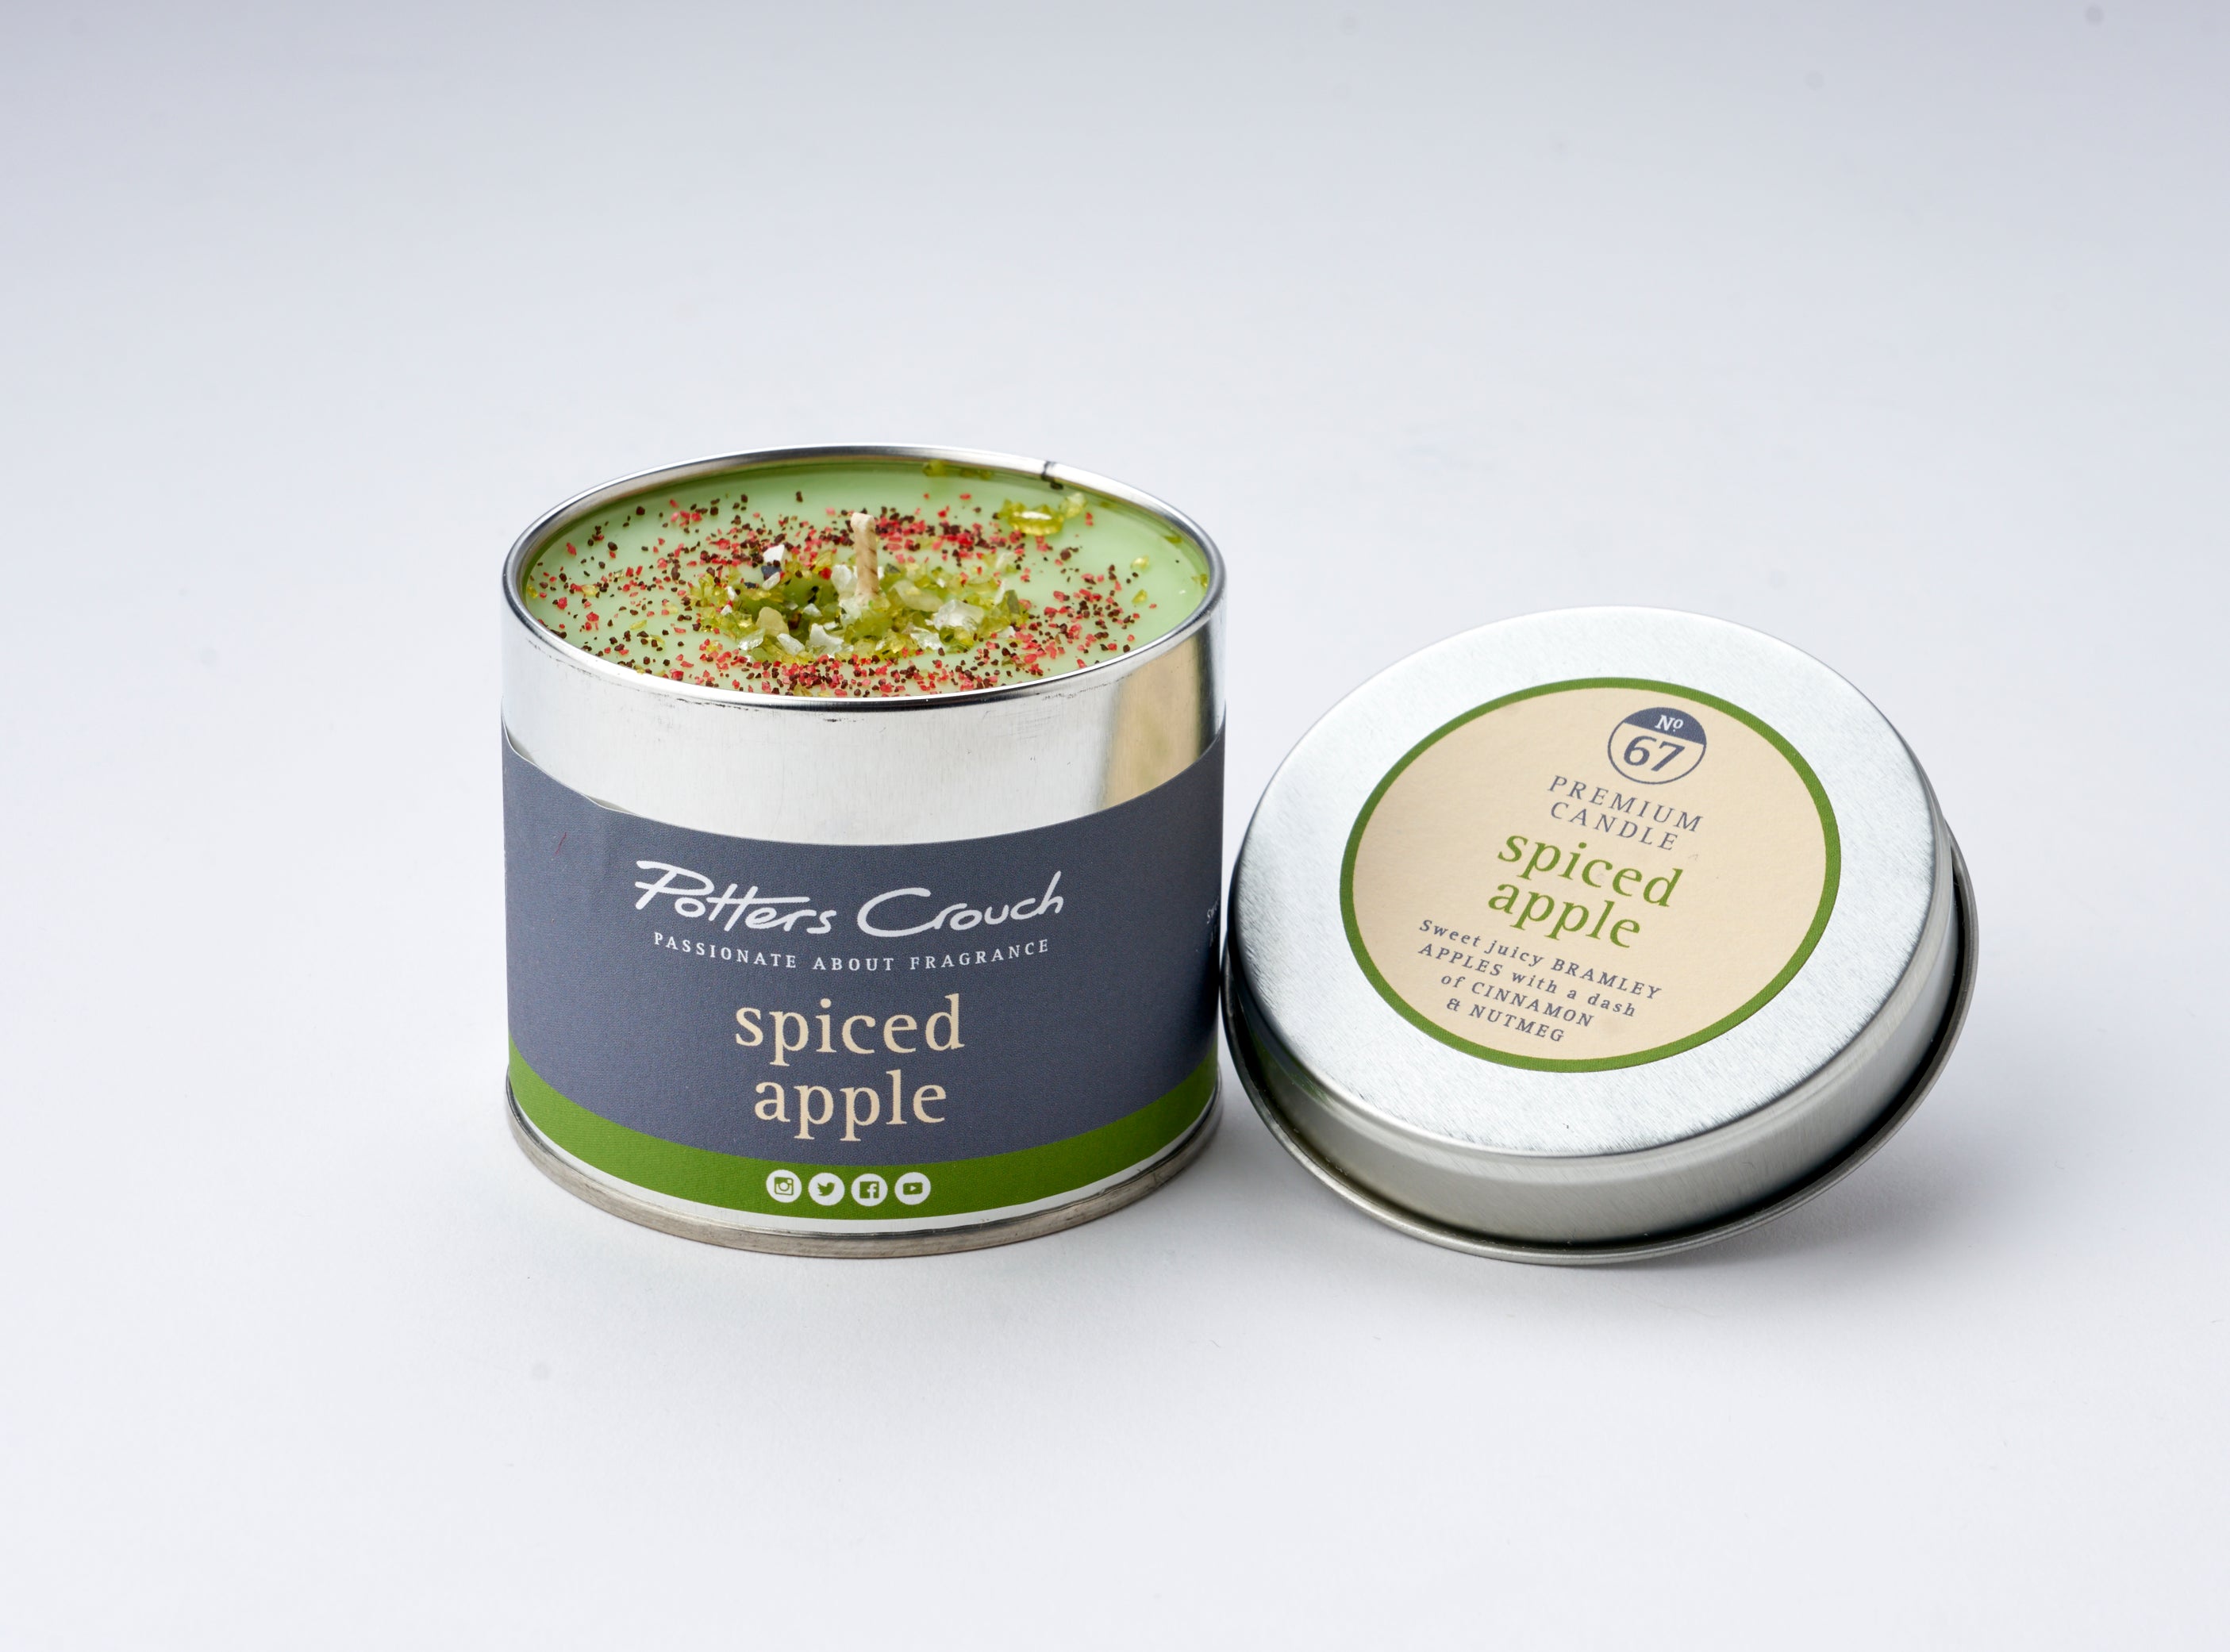 Spiced Apple - Scented Candle in a Tin - Potters Crouch